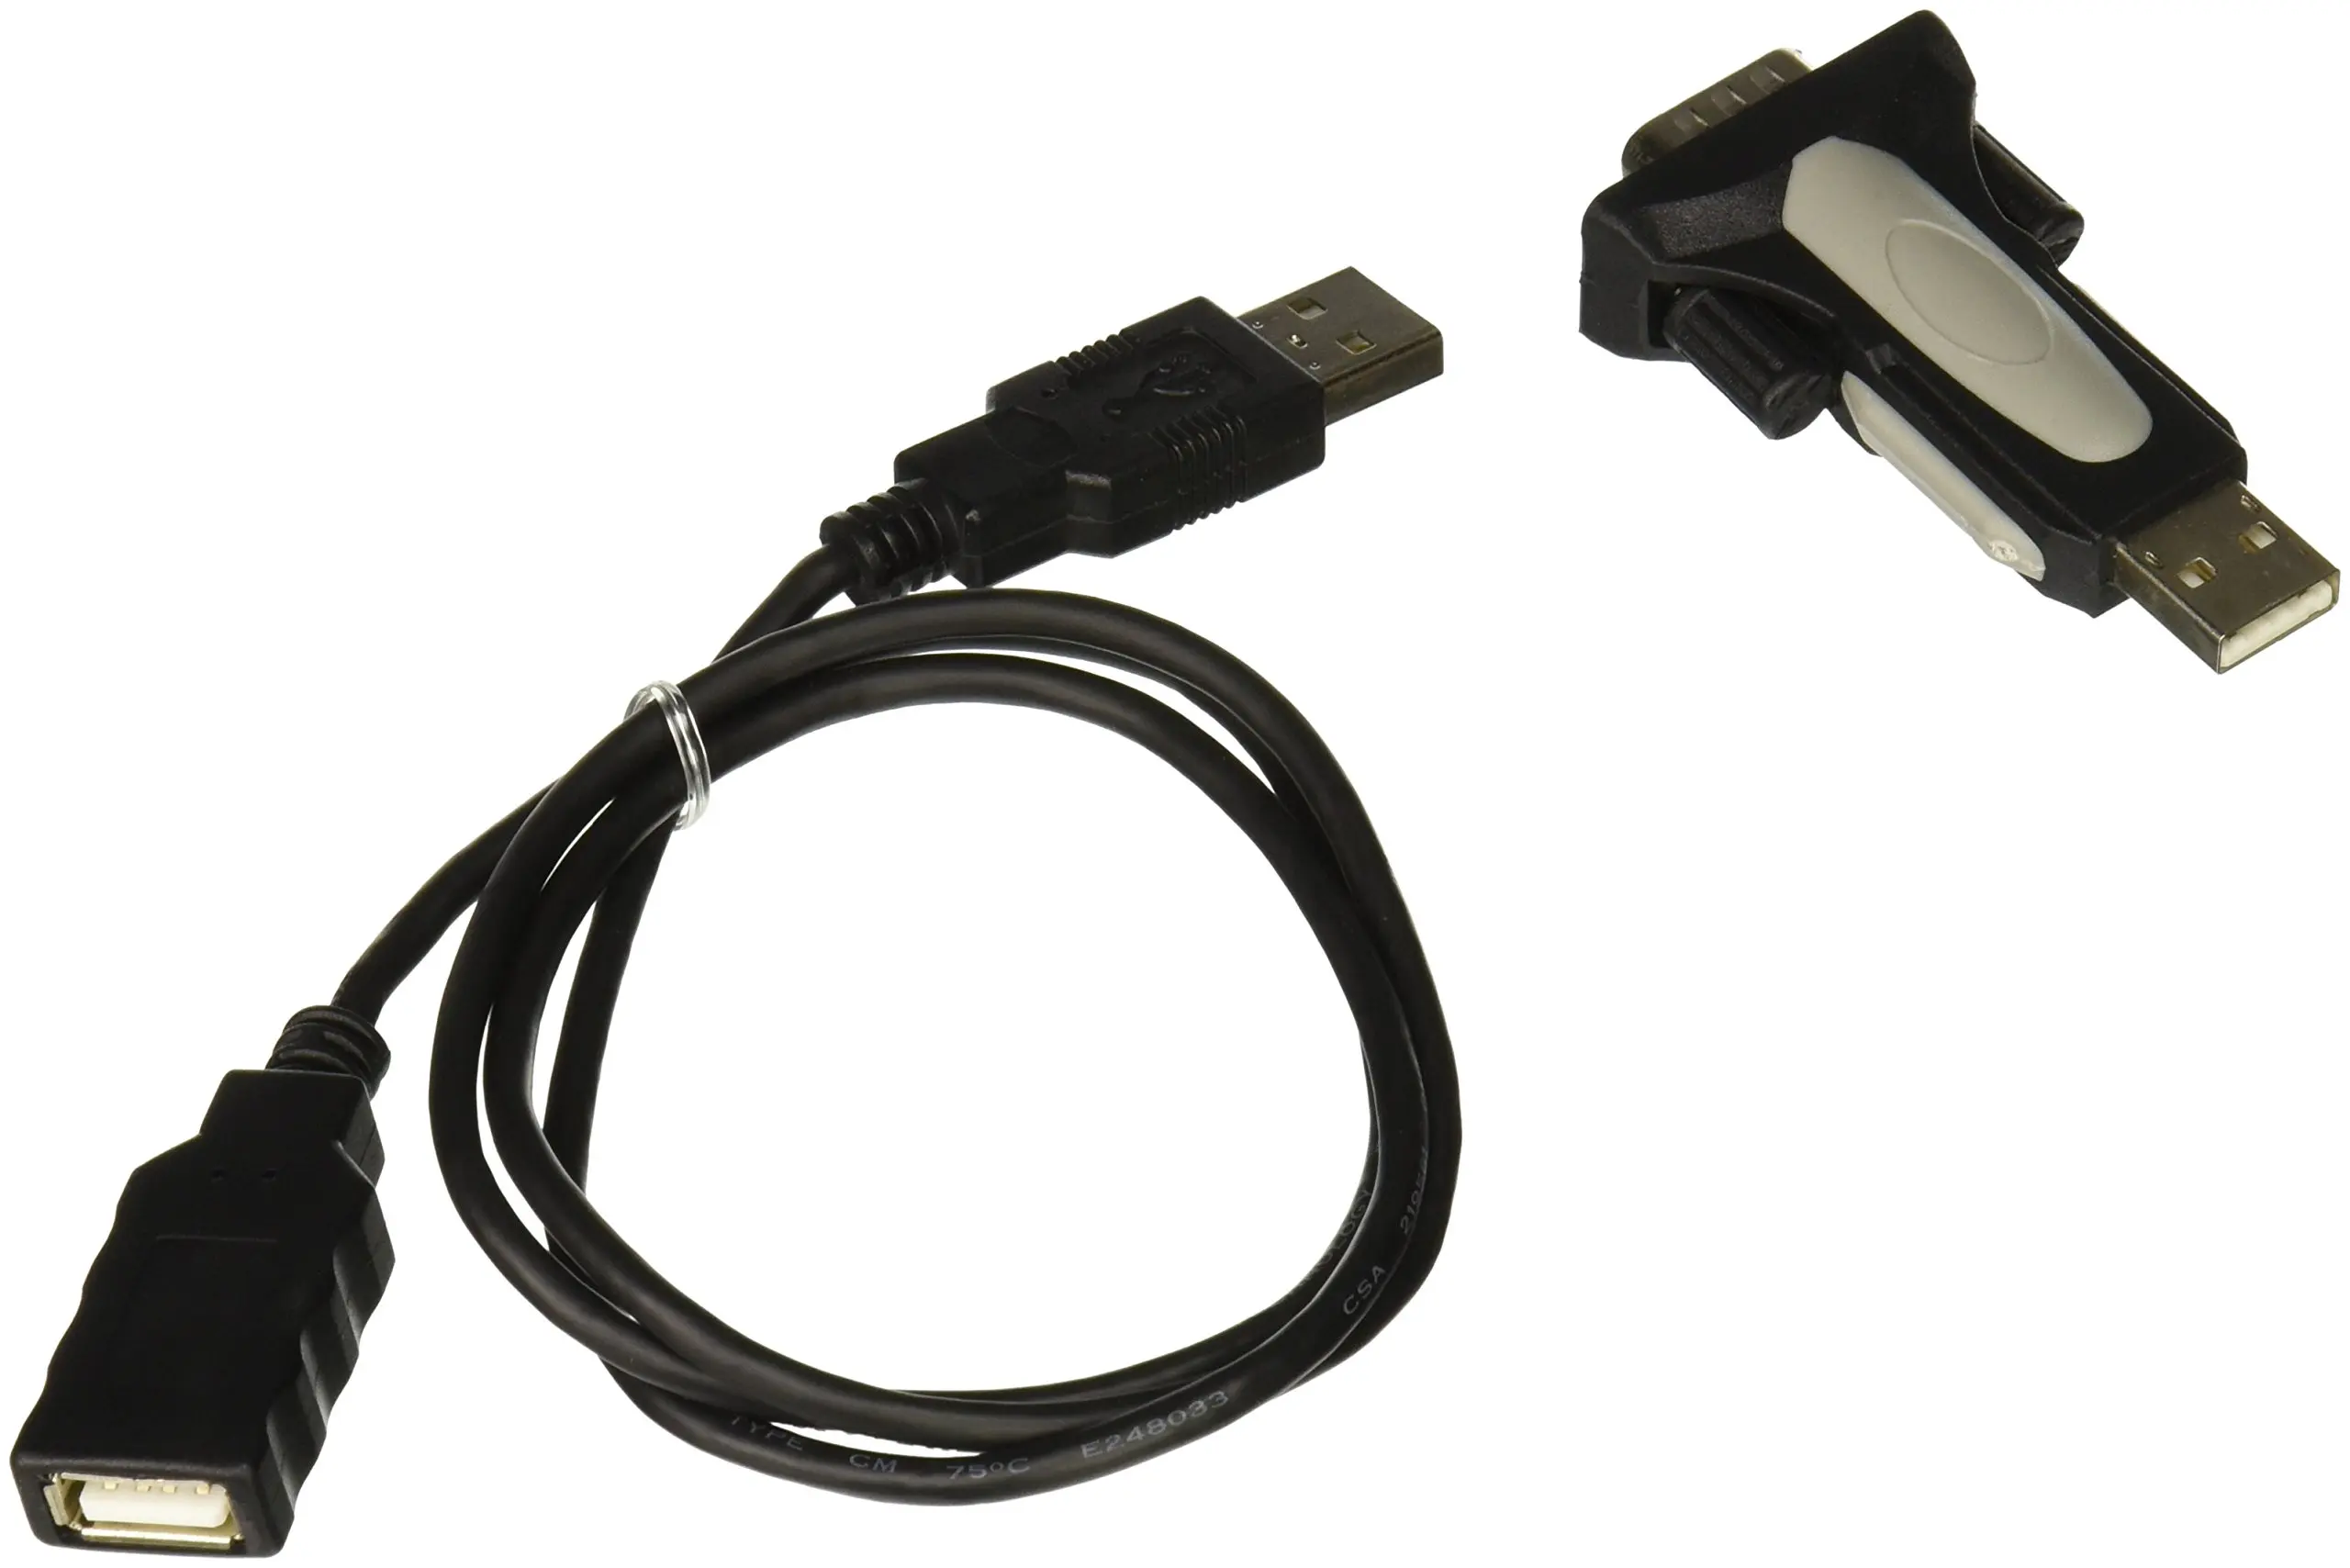 Usb2serial Driver For Mac